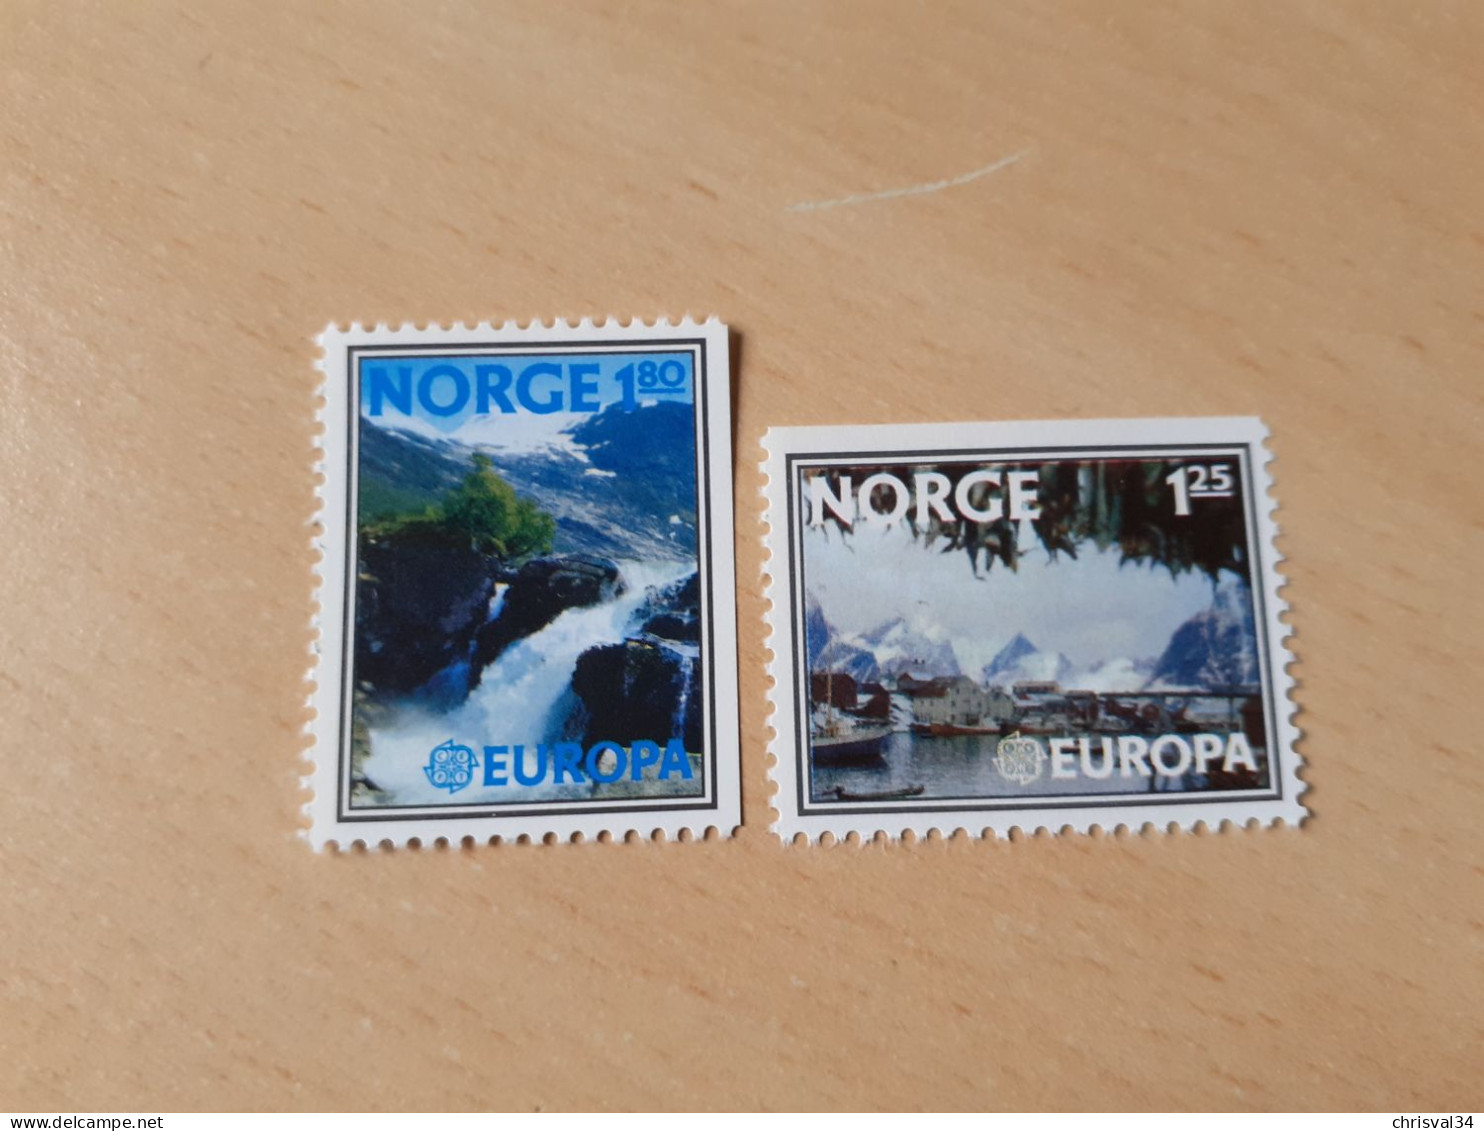 TIMBRES   NORVEGE   ANNEE    1977   N  698a  +  699a   COTE  5,50  EUROS   NEUFS  LUXE** - Nuevos